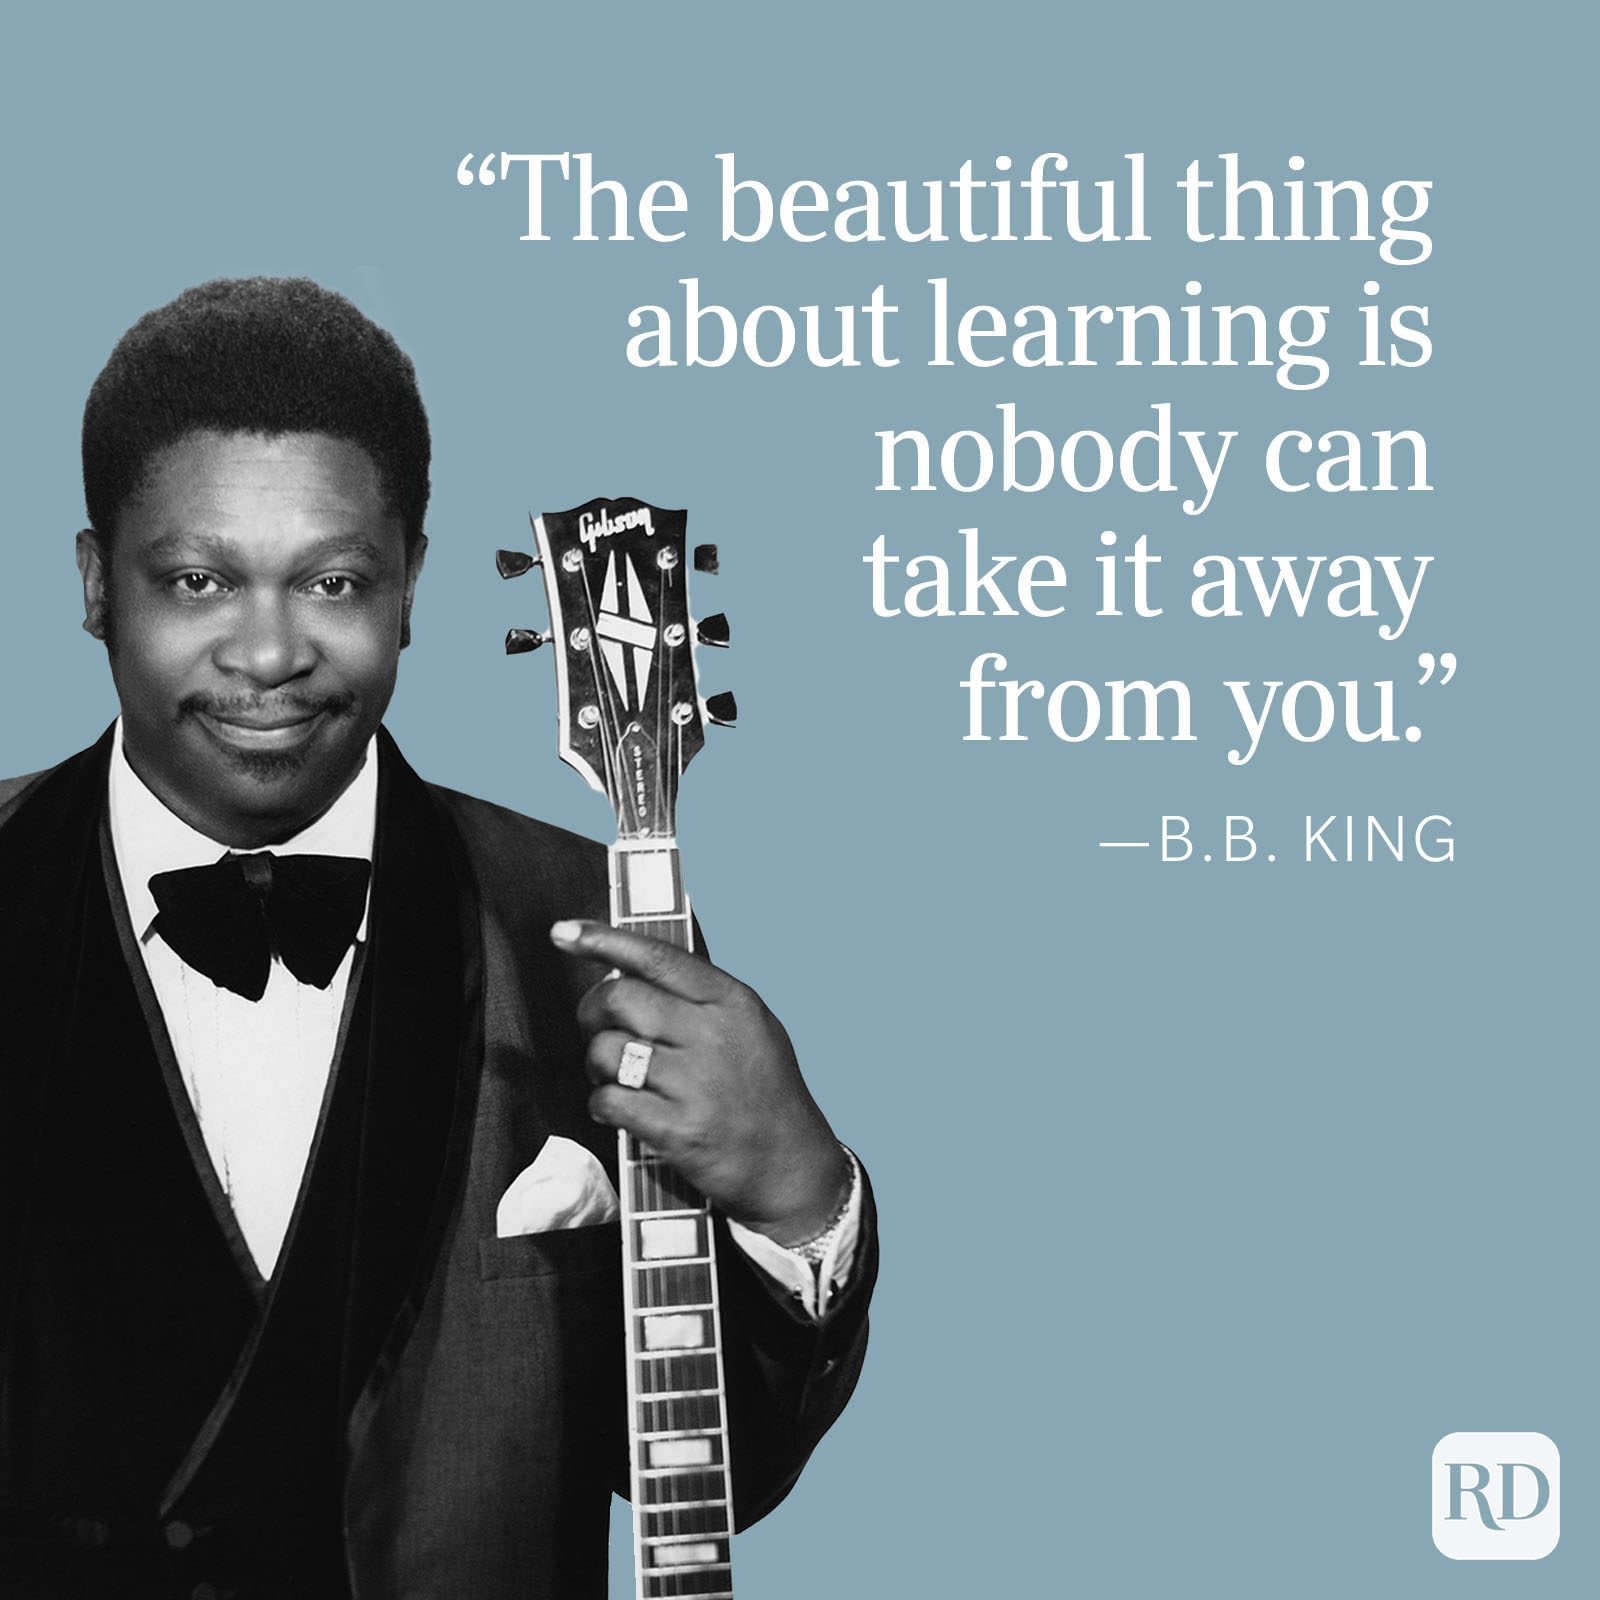 bb king life quote